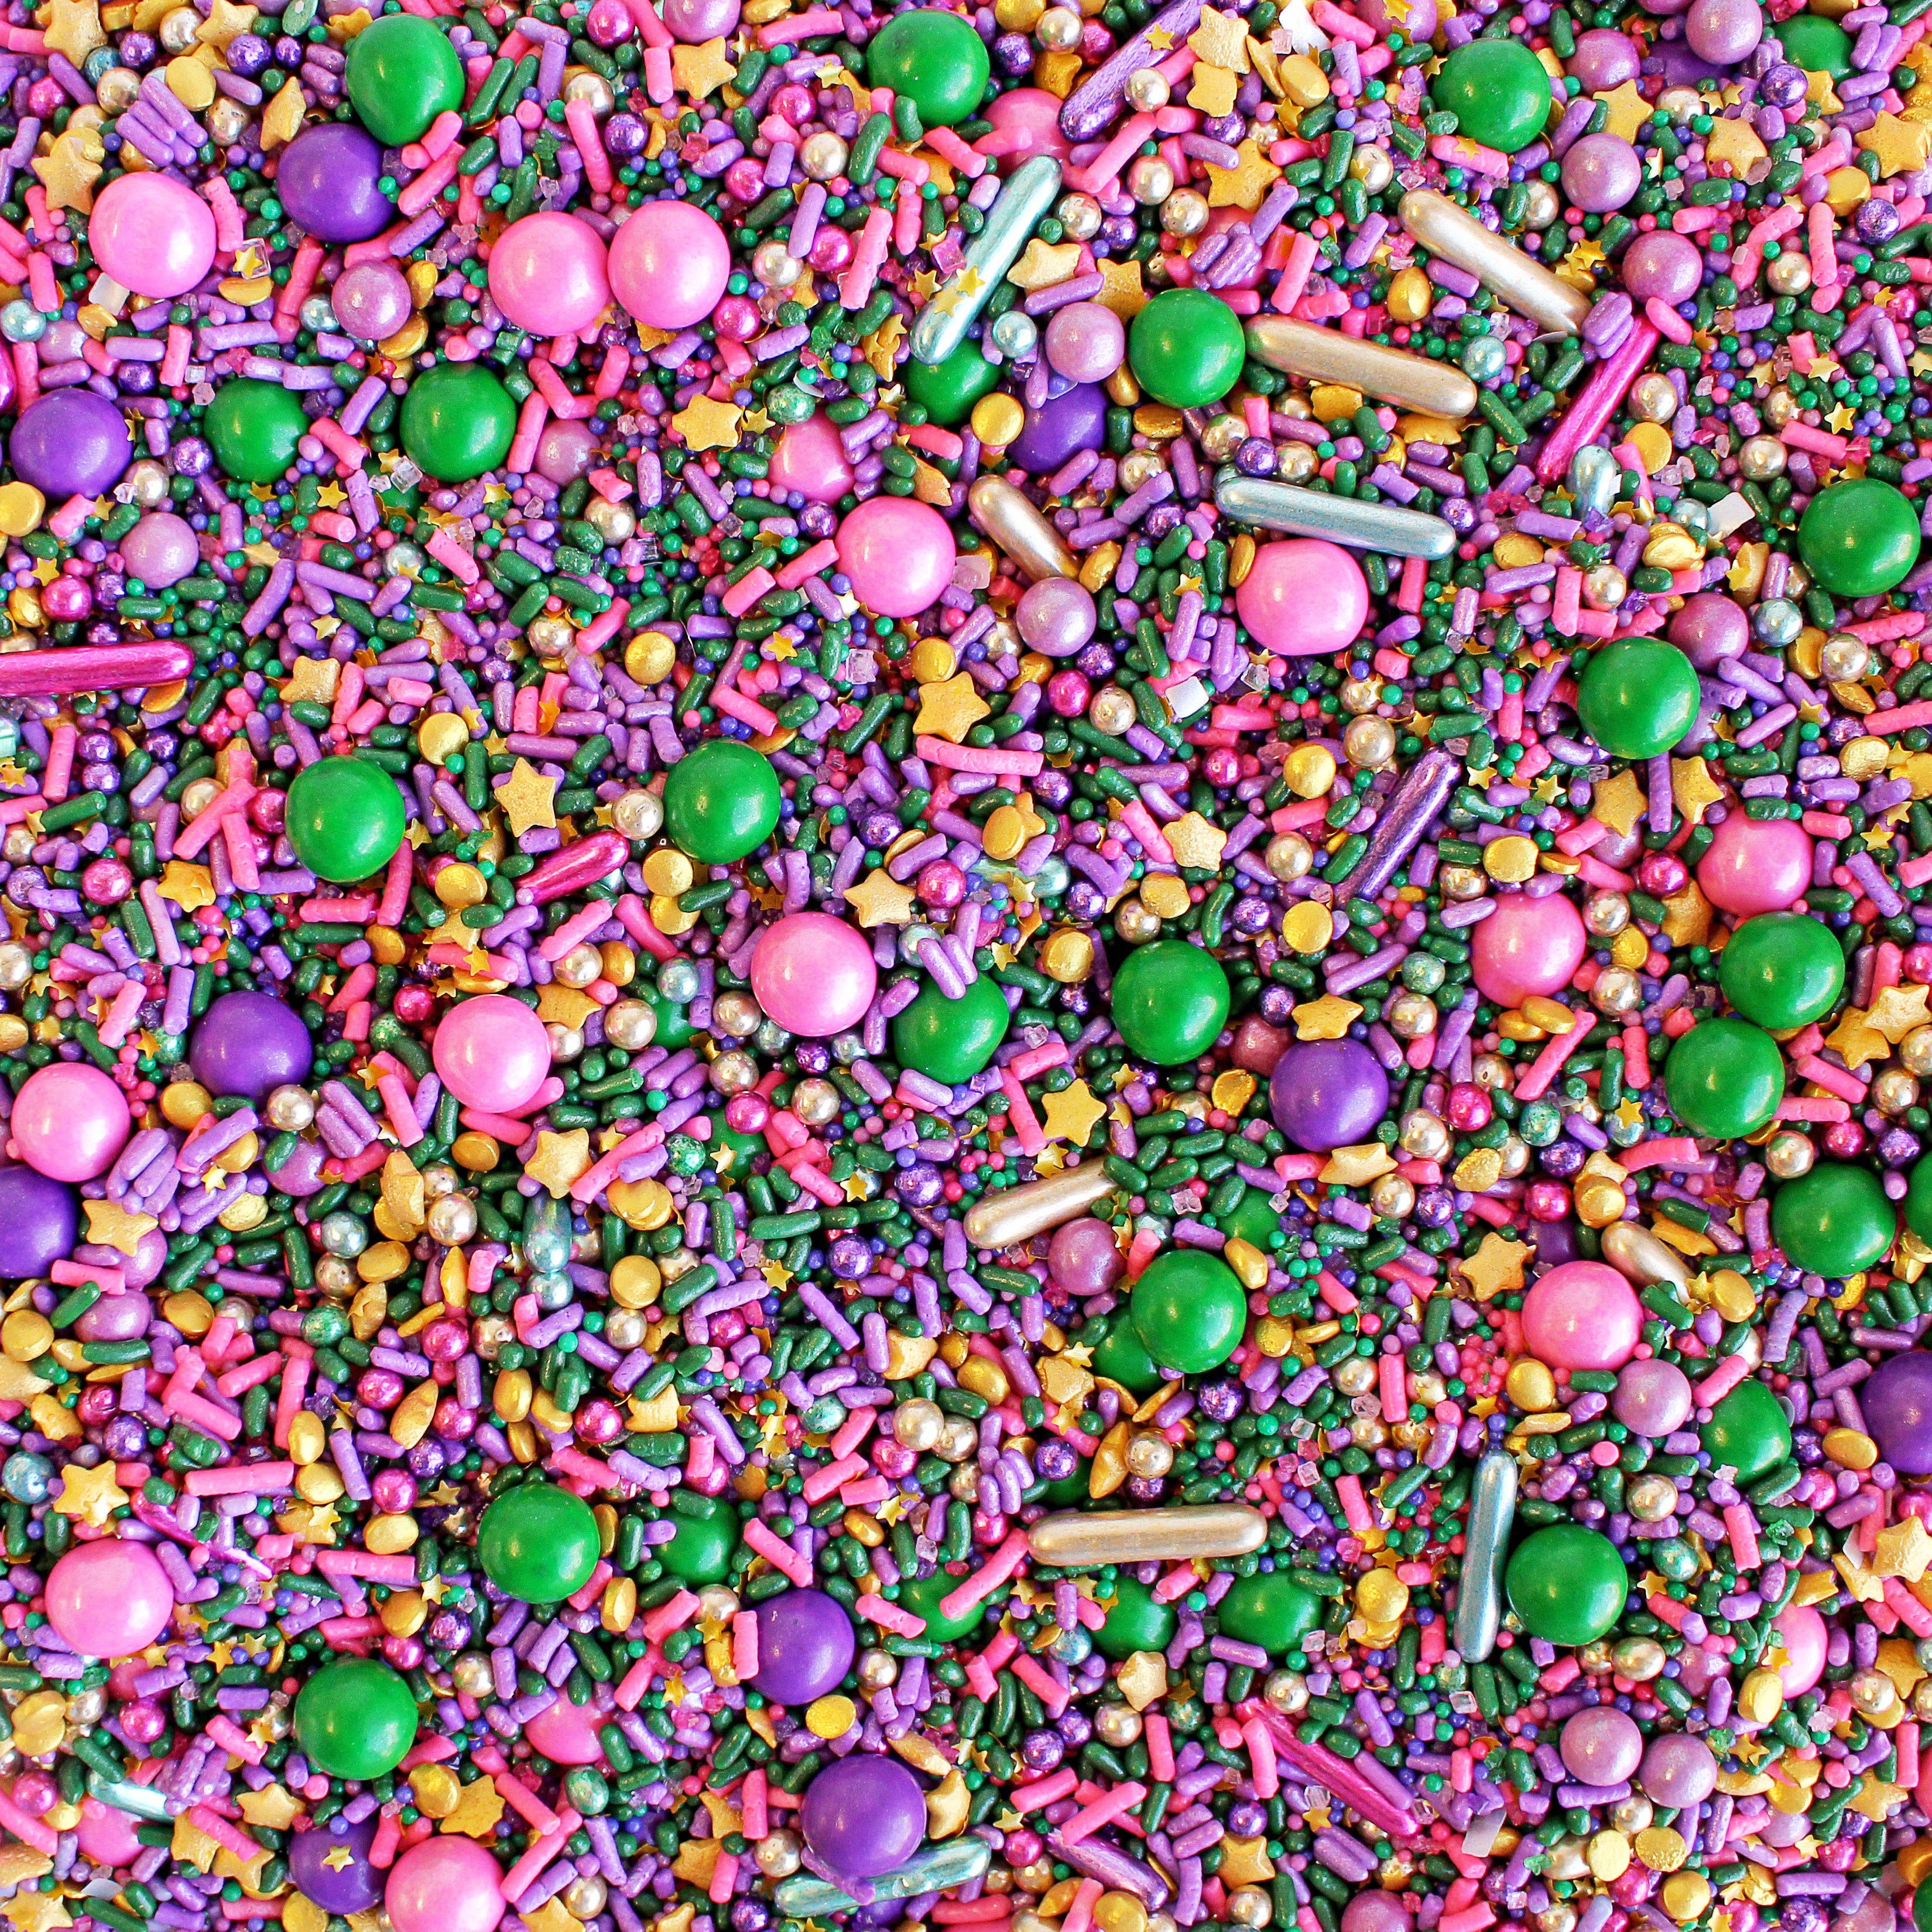 150g Bright Carnival rainbow/spring sprinkles cake/cupcake toppers.Dragees